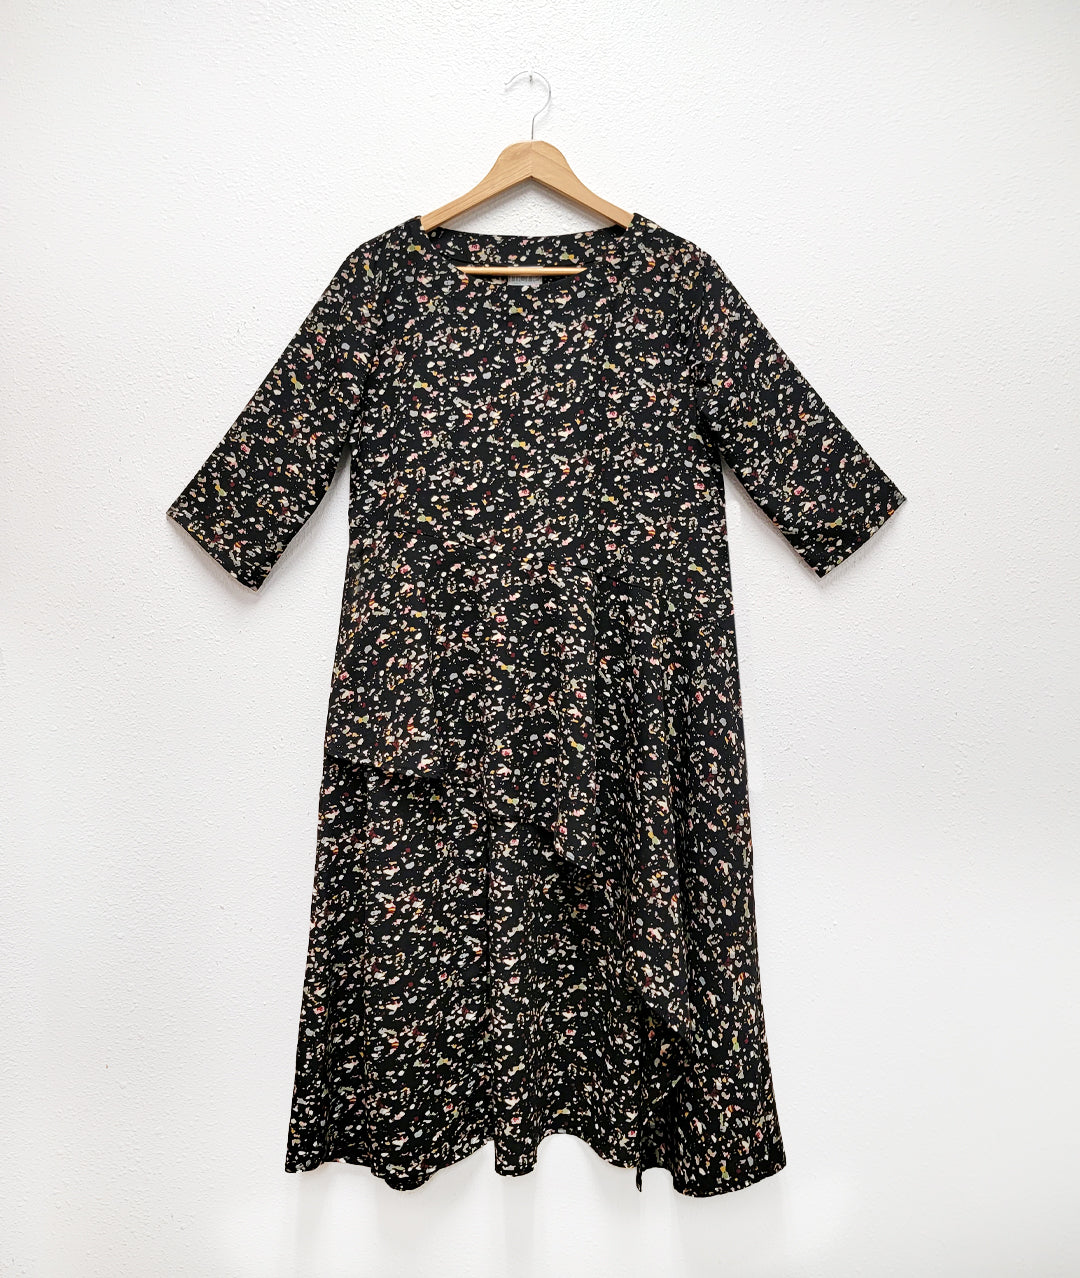 black terrazzo print tunic with elbow length sleeves and an asymmetrical waist and skirt, with a short front and long sides and back. pockets set into side seams